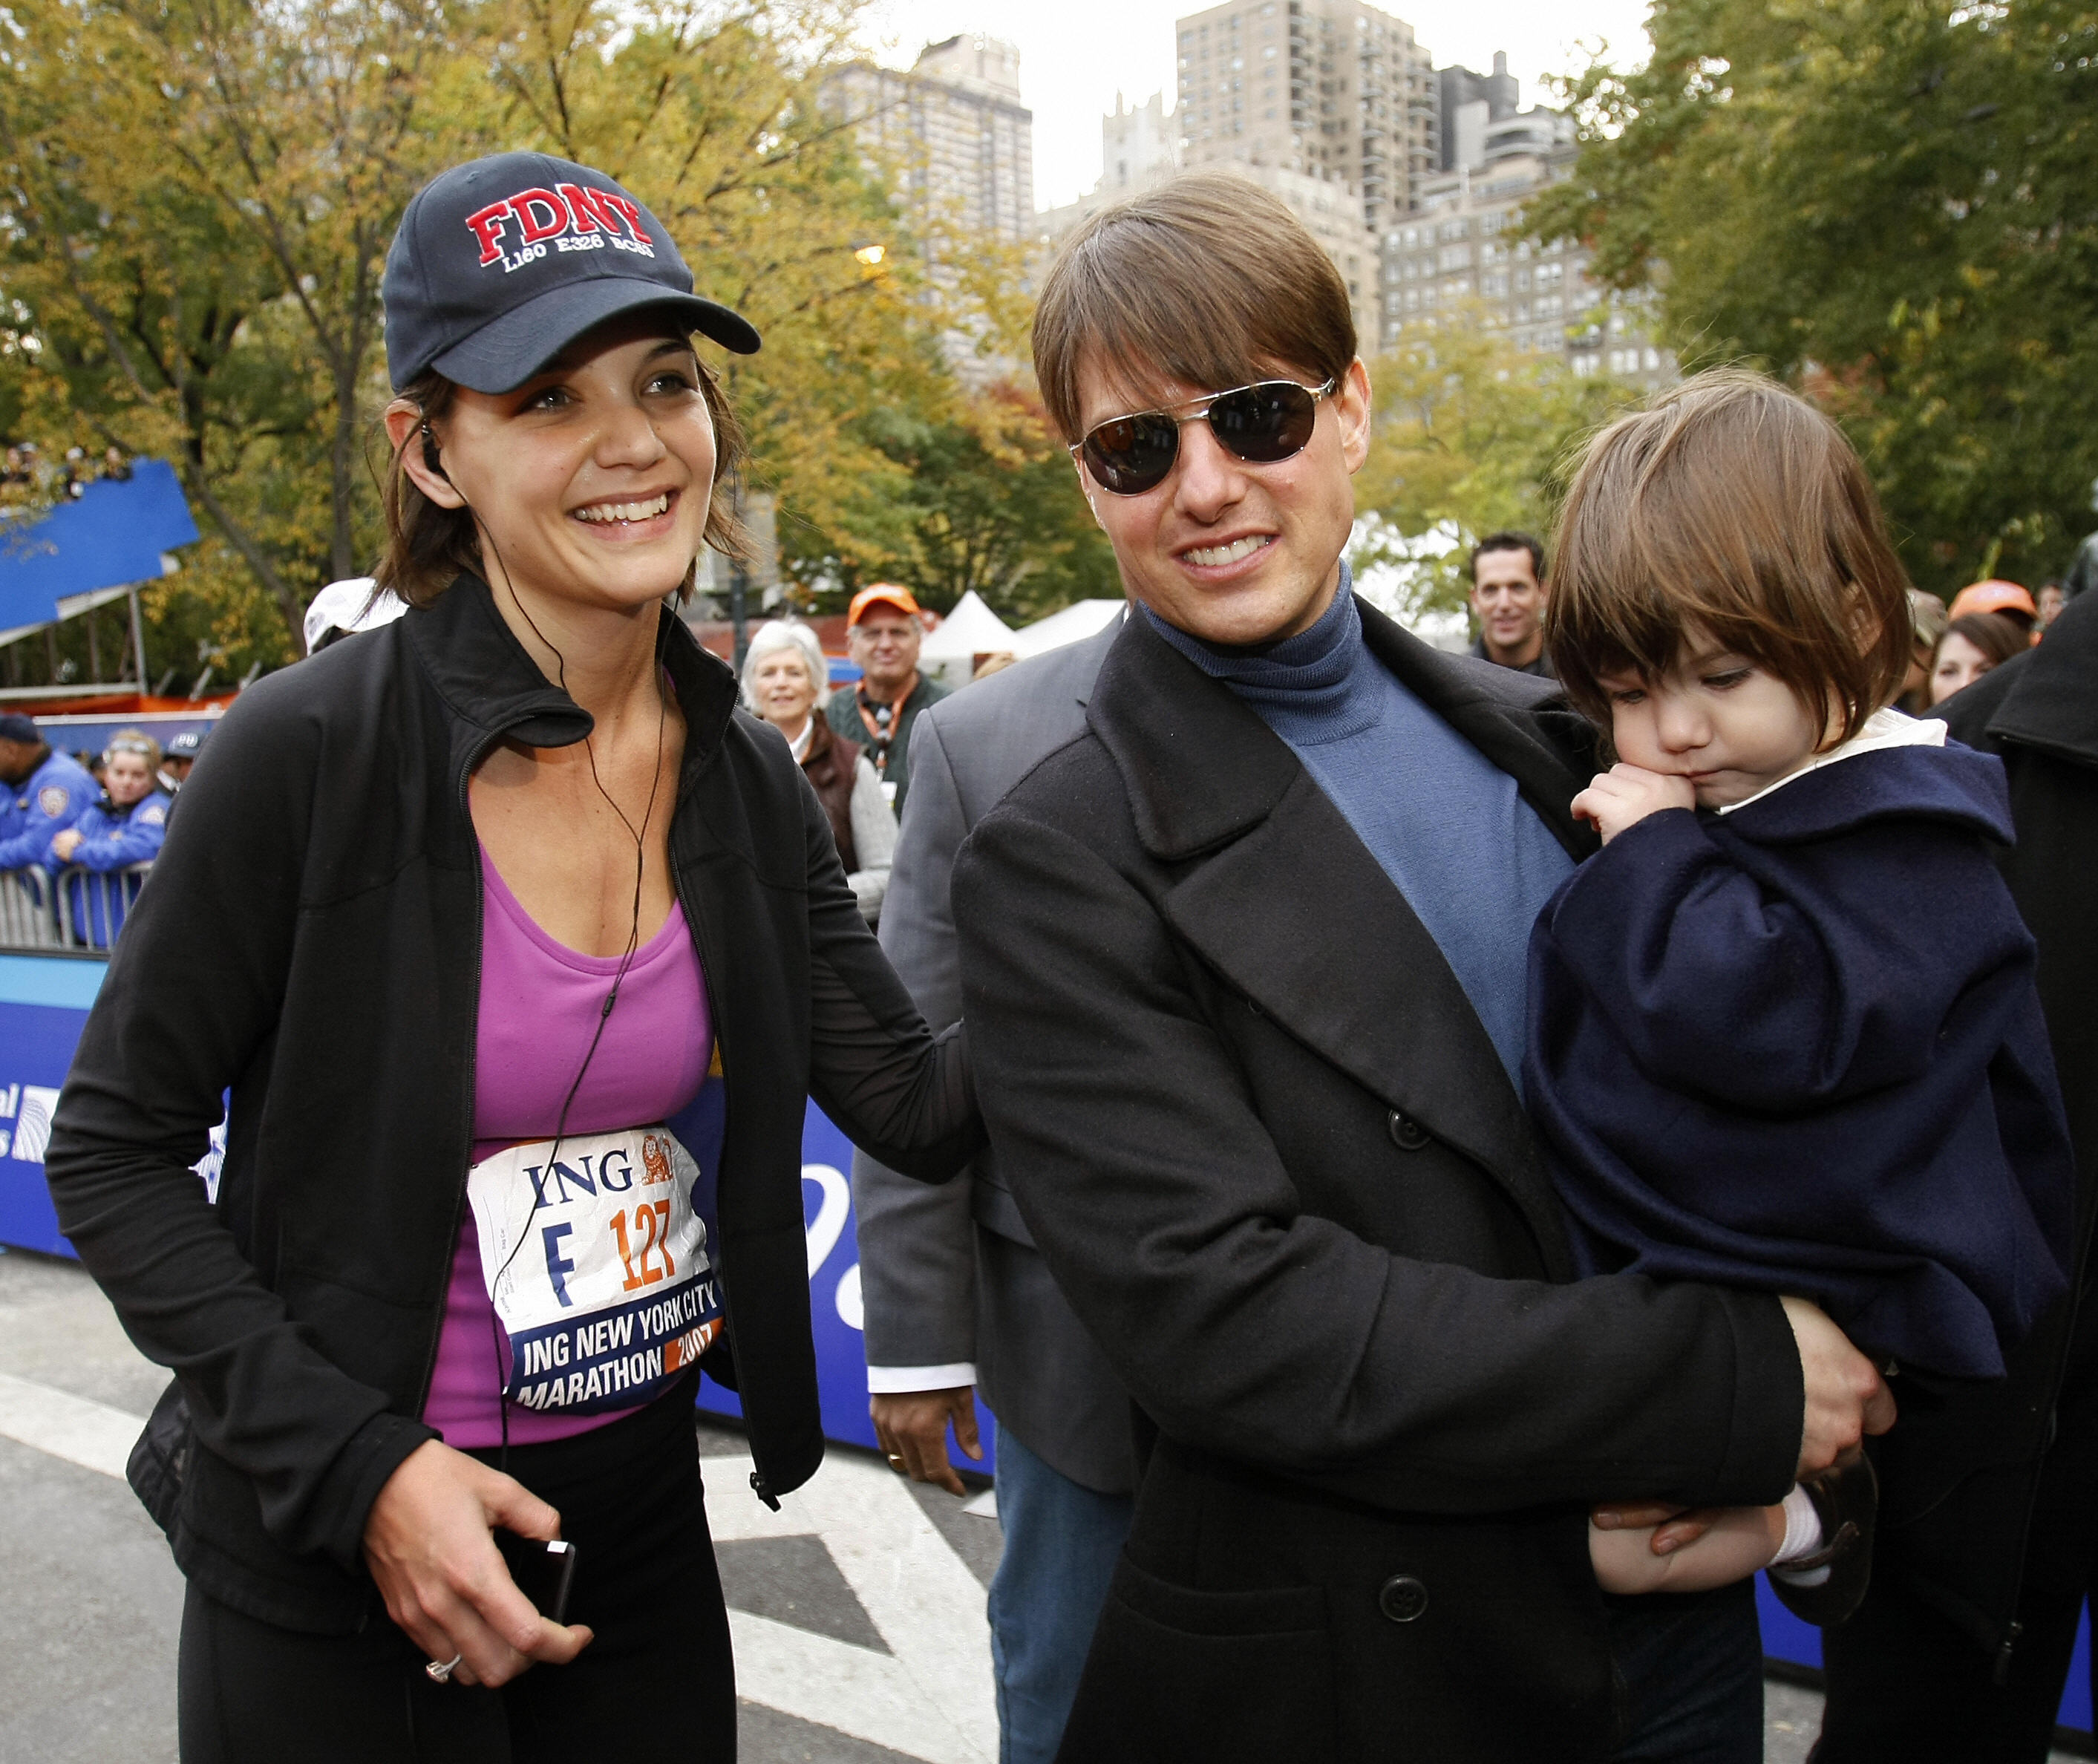 Tom Cruise, Suri Cruise, and Katie Holmes in New York on November 4, 2007 | Source: Getty Images